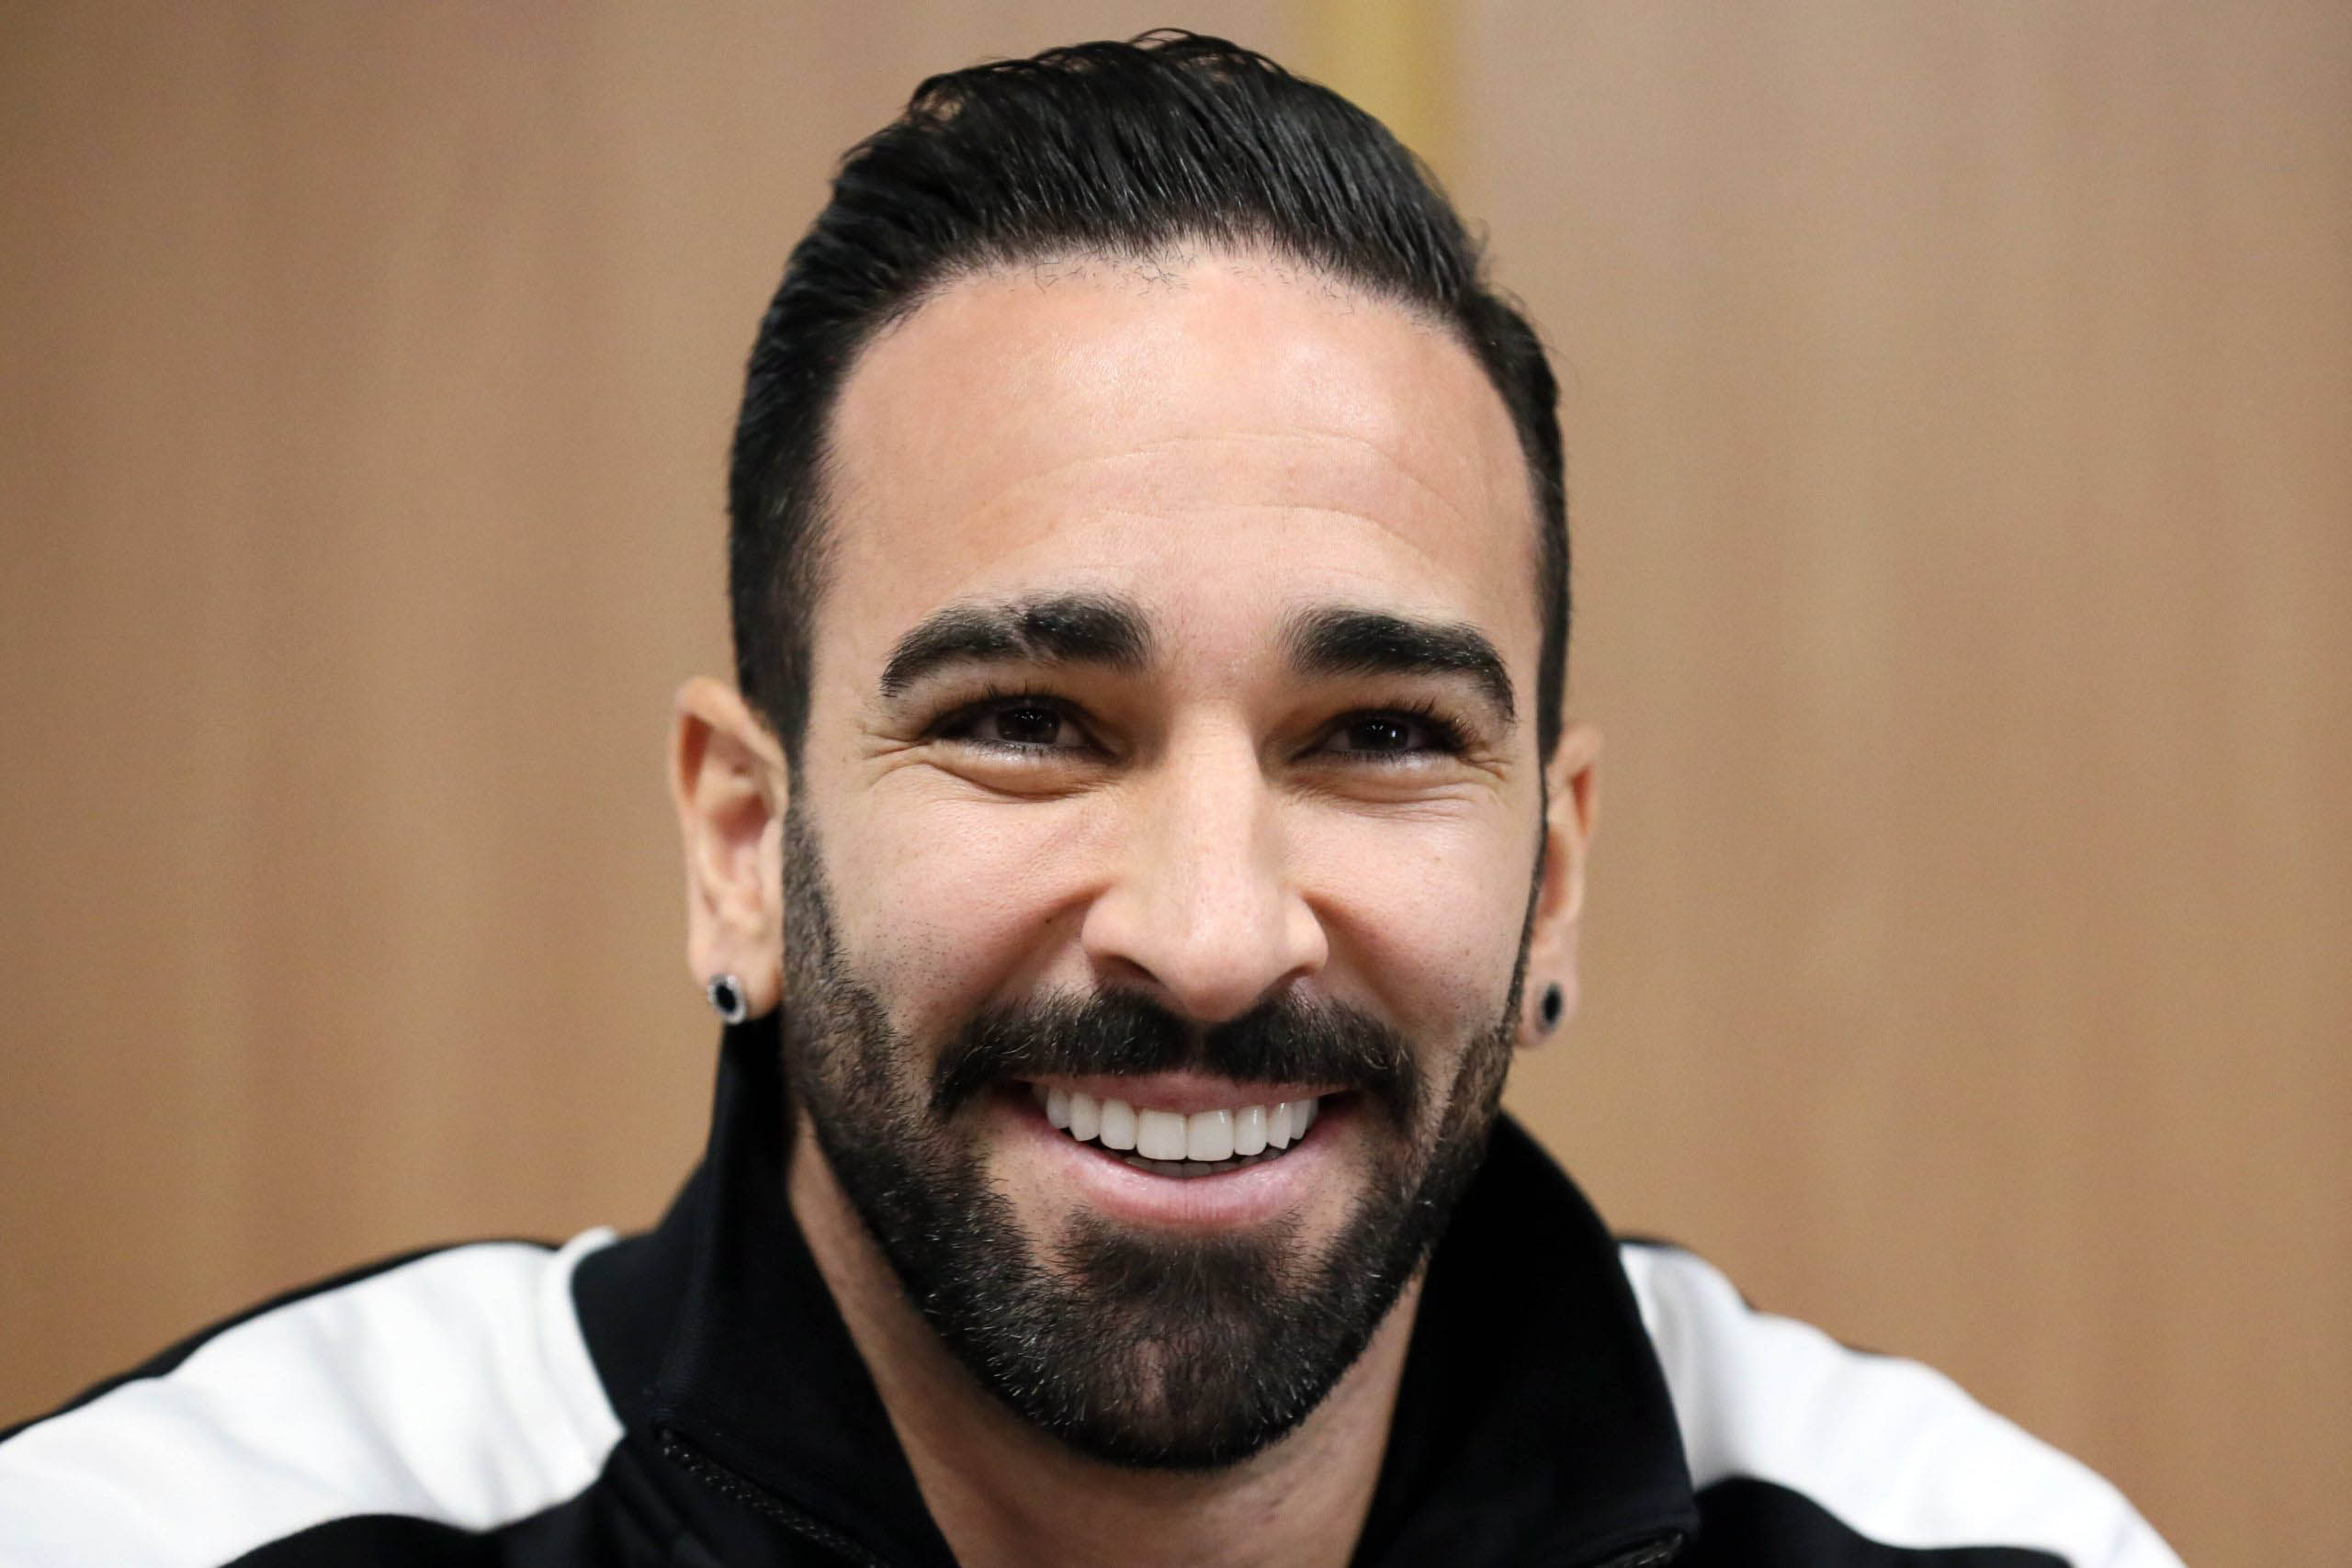 22 Intriguing Facts About Adil Rami - Facts.net